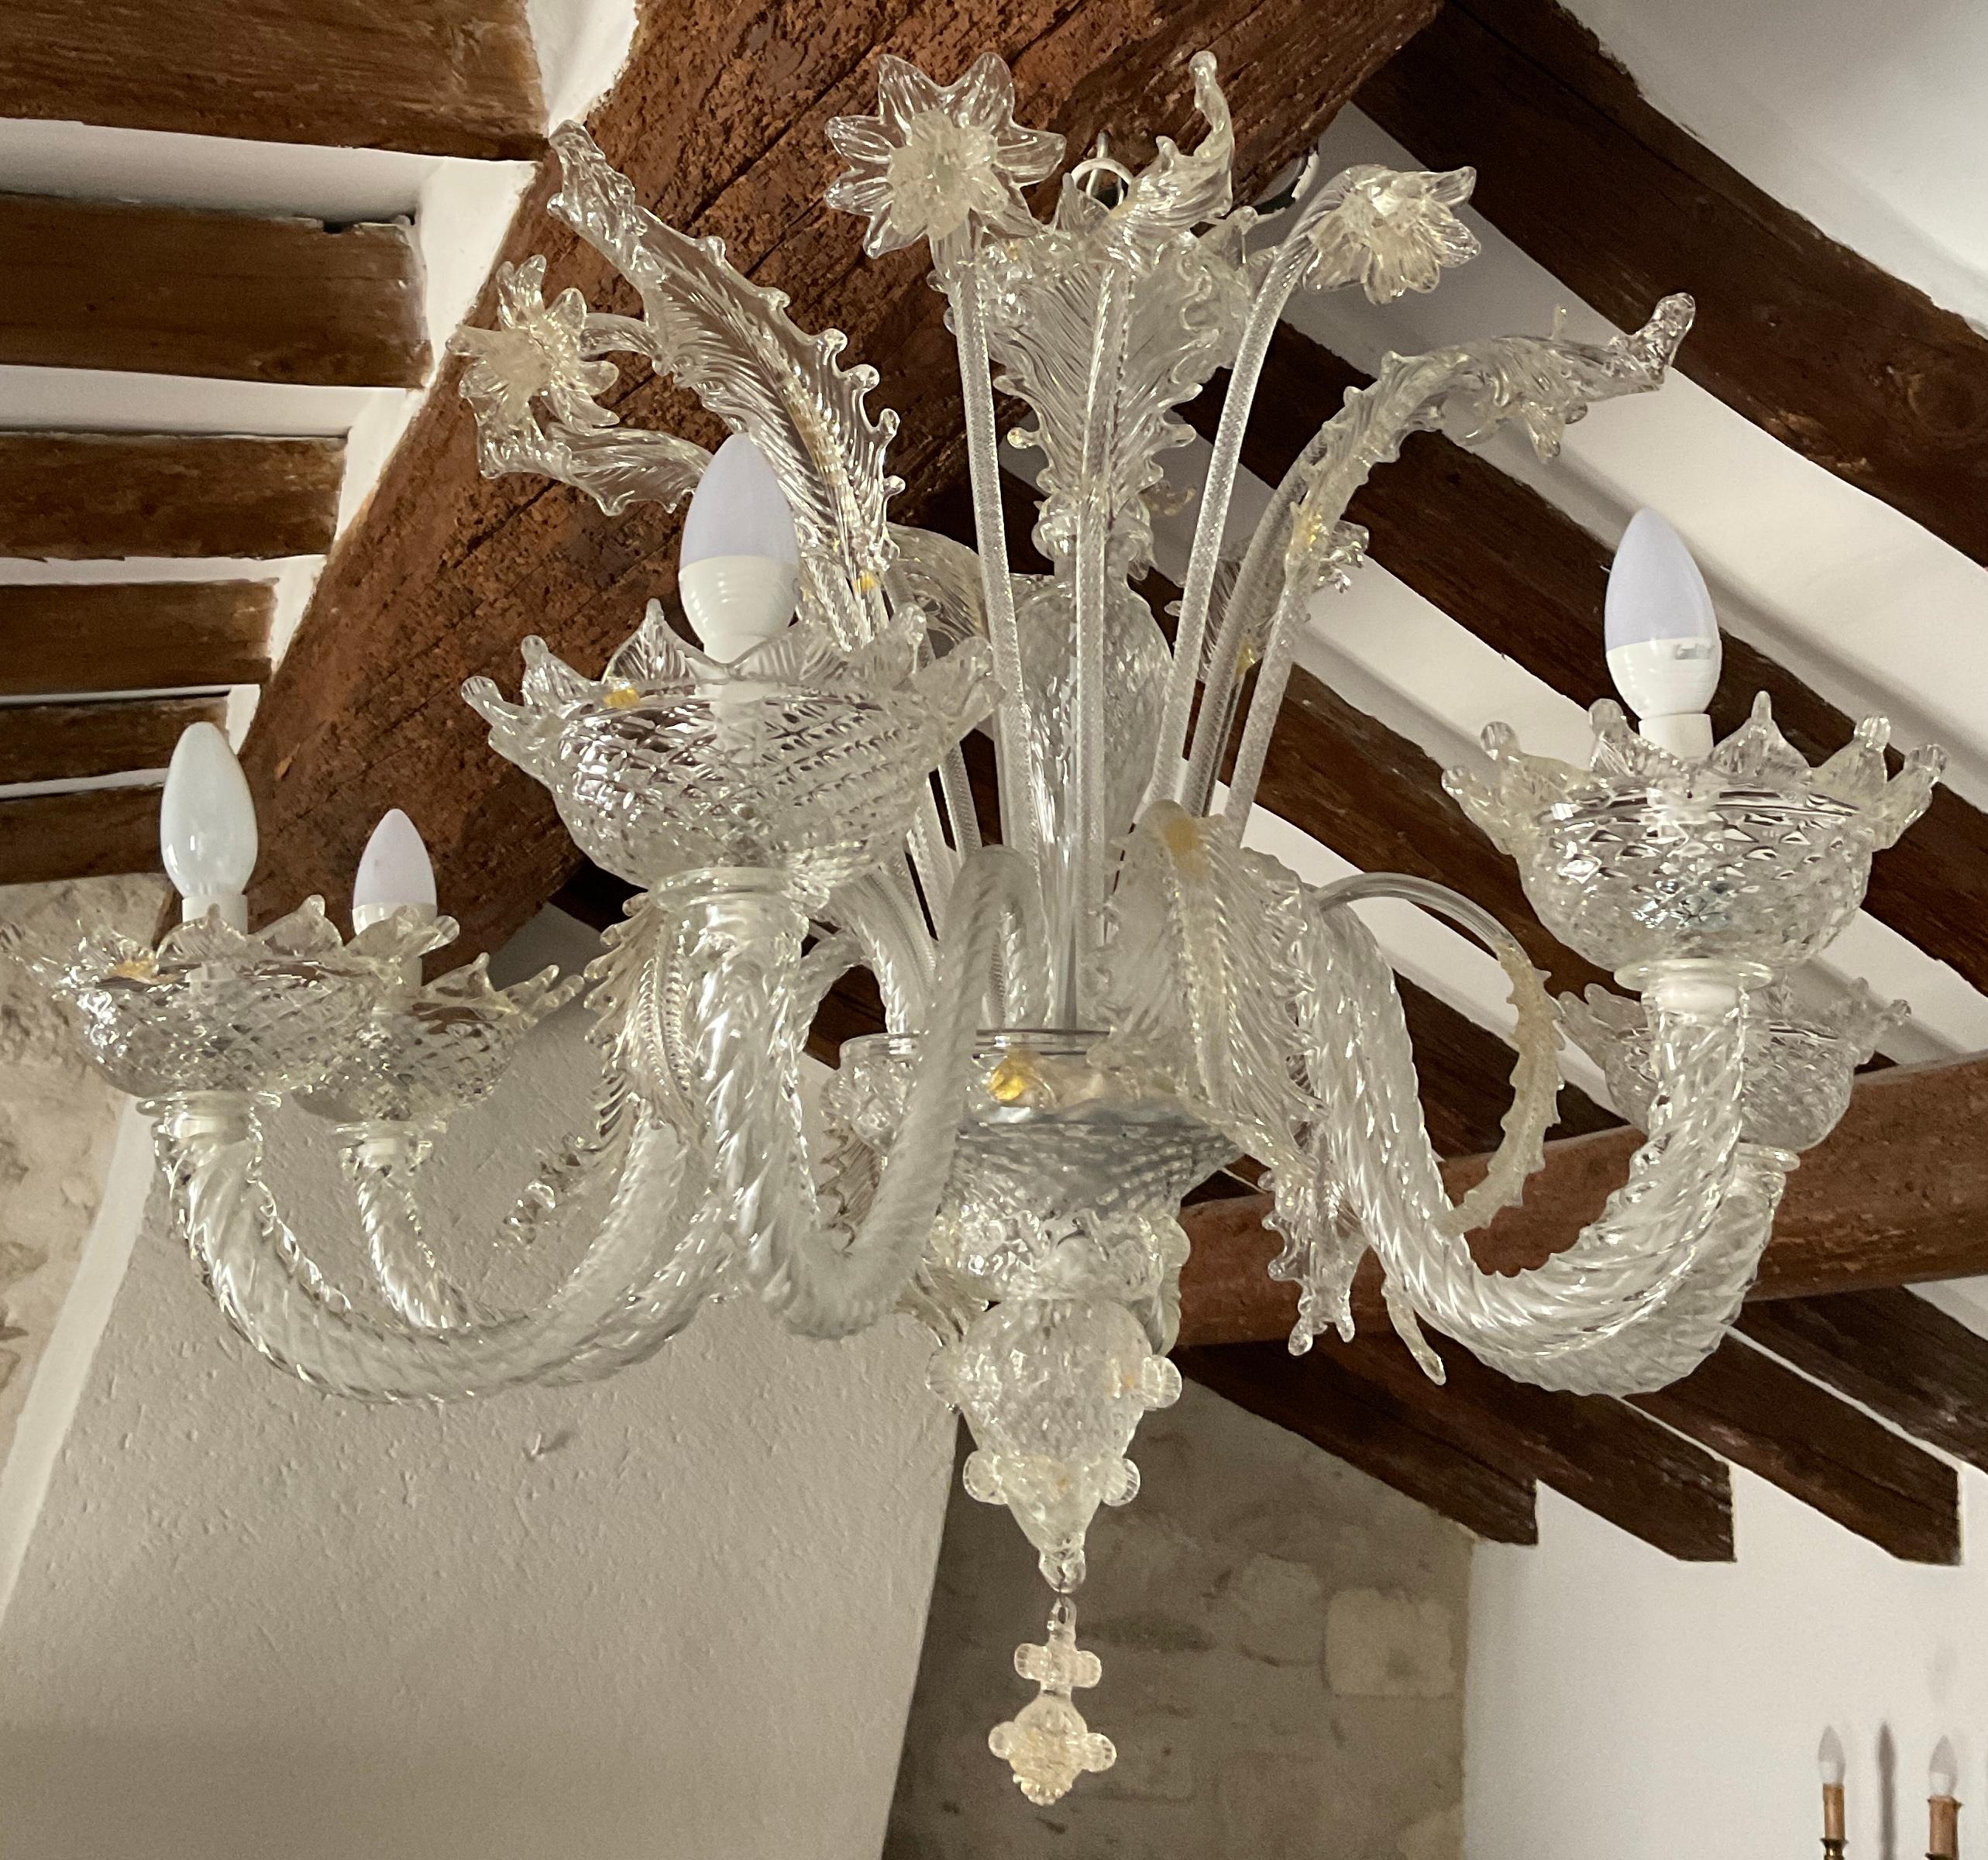 Large antique Italian Venetian Murano glass 6 scroll & swirl design arm chandelier with applied trim. Separate flower motifs and leaves. Gold dust inclusions. Similar to chandeliers designed by Fabiano Zanchi. 

Approximate Dimensions: 
Height: 36